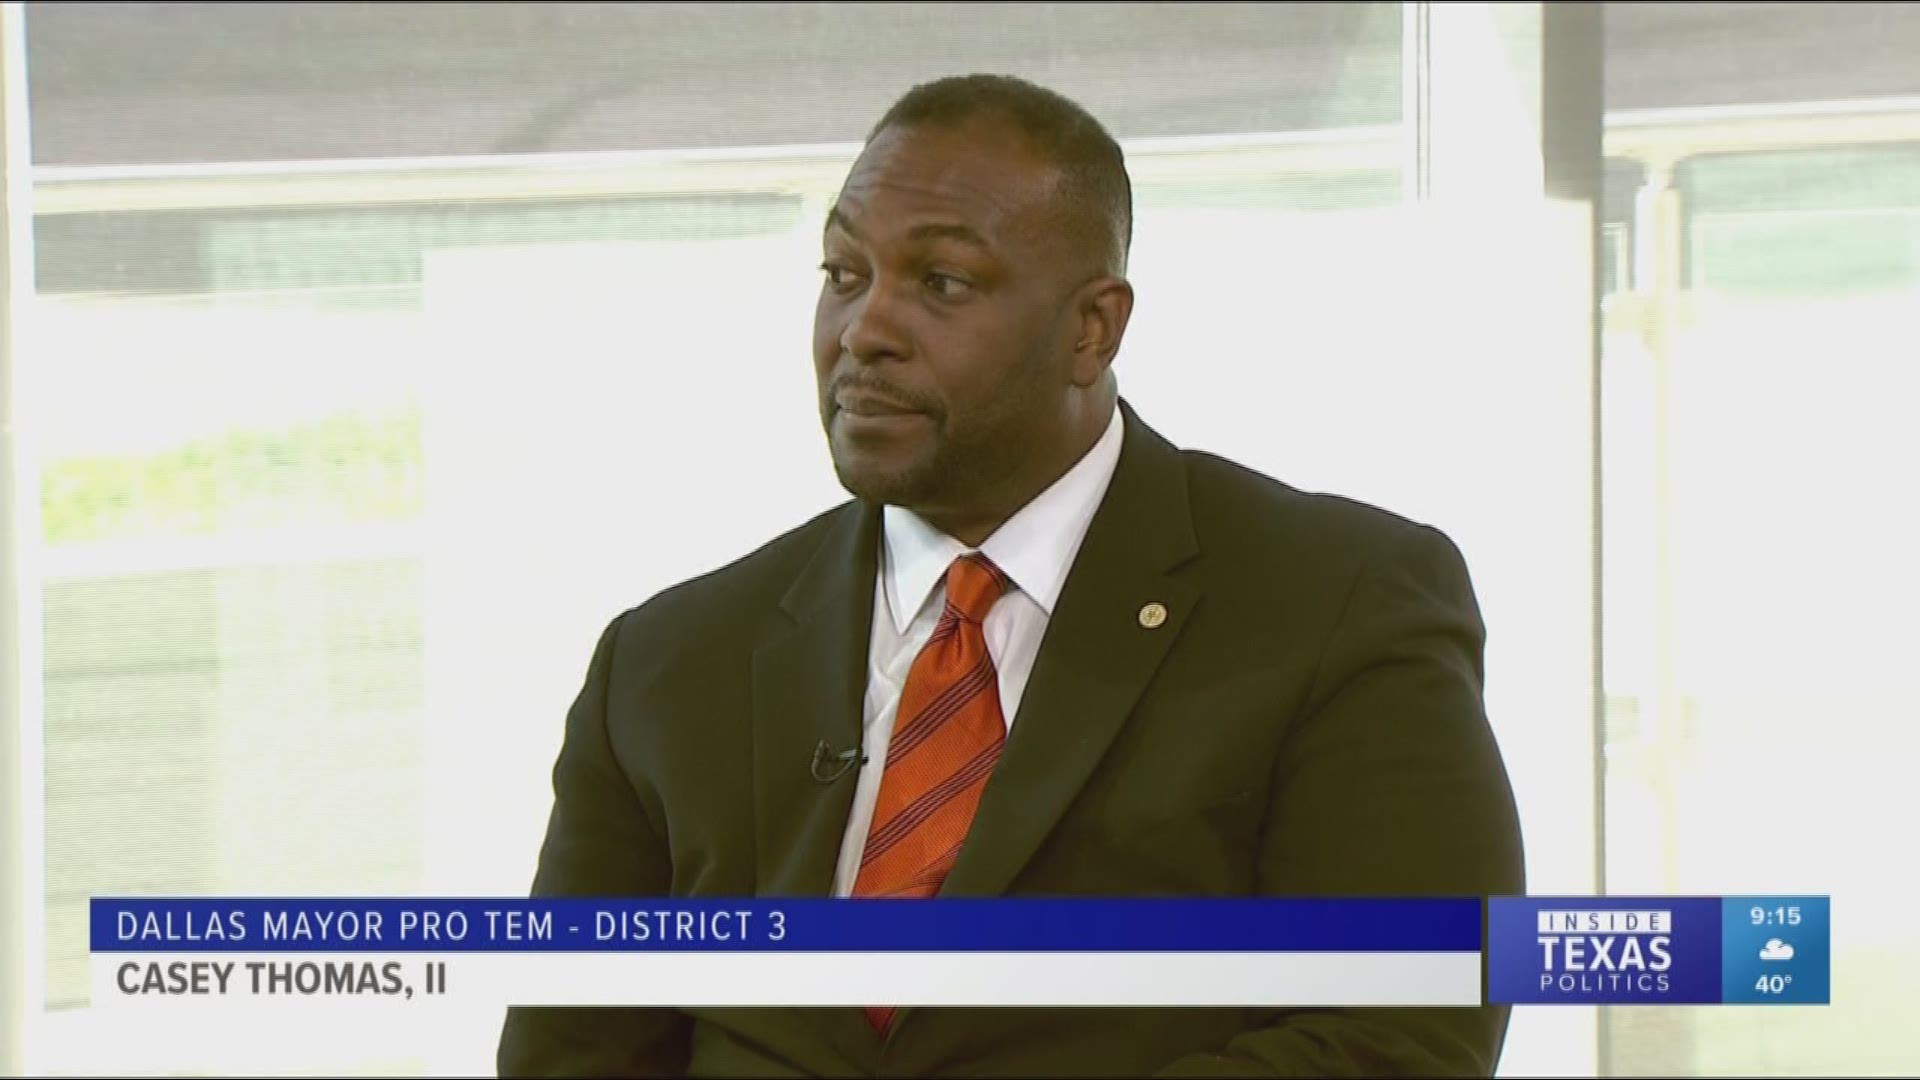 For decades Dallas has struggled with how to bridge the gap between its northern and southern sectors. Dallas is now implementing new strategies to close the economic disparities between the north and south. Mayor Pro Tem Casey Thomas joined host Jason Wh